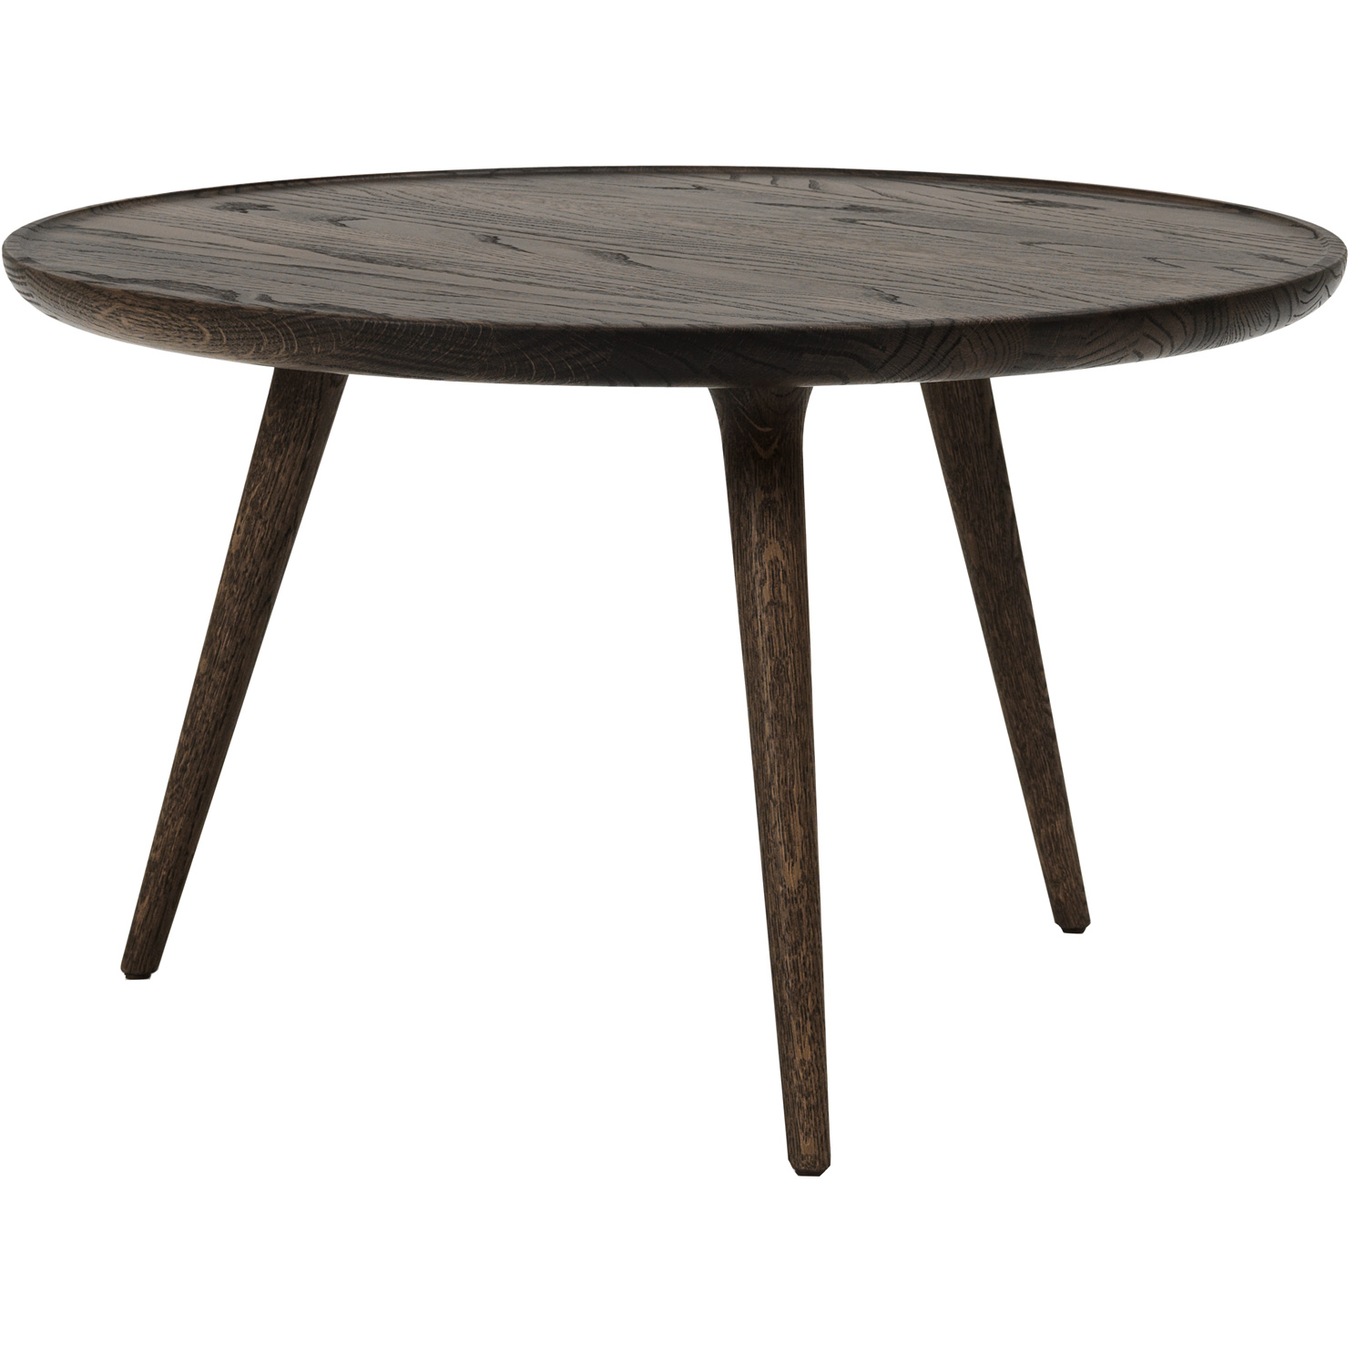 Accent Coffee Table 70 cm, Sirka Grey Stained Oak